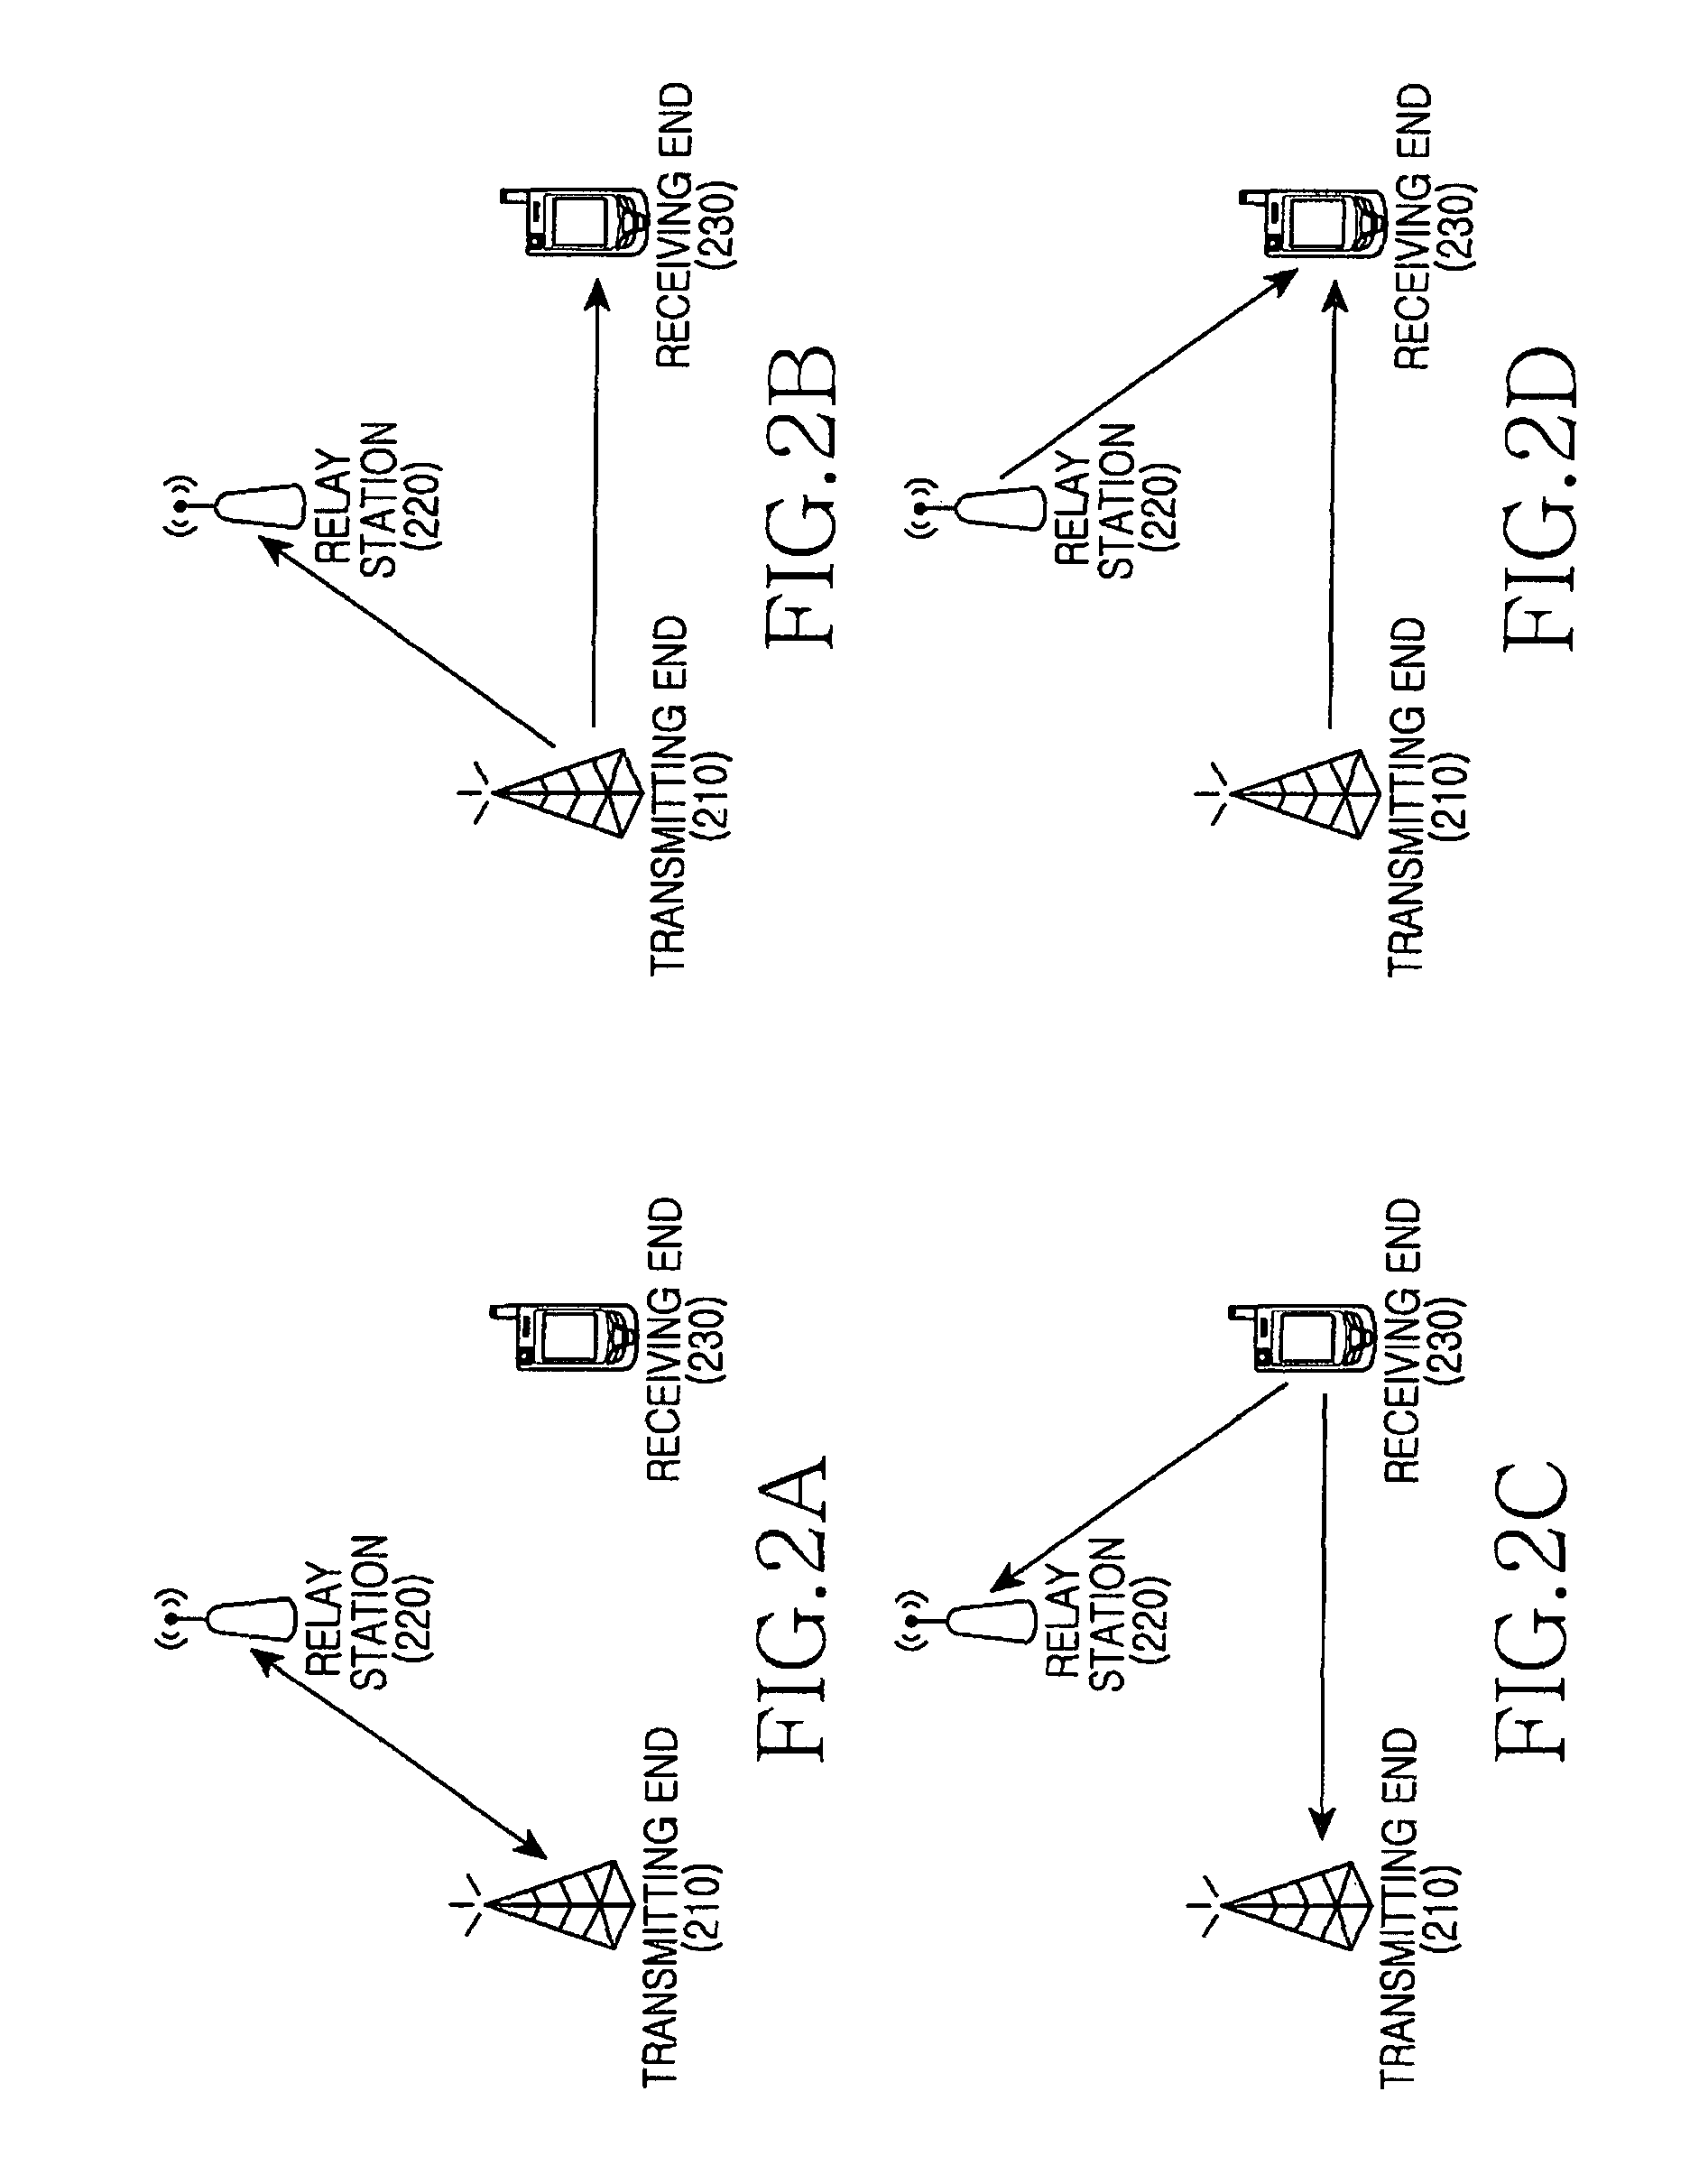 Apparatus and method for collaborative hybrid automatic repeat request (HARQ) in broadband wireless communication using relay station